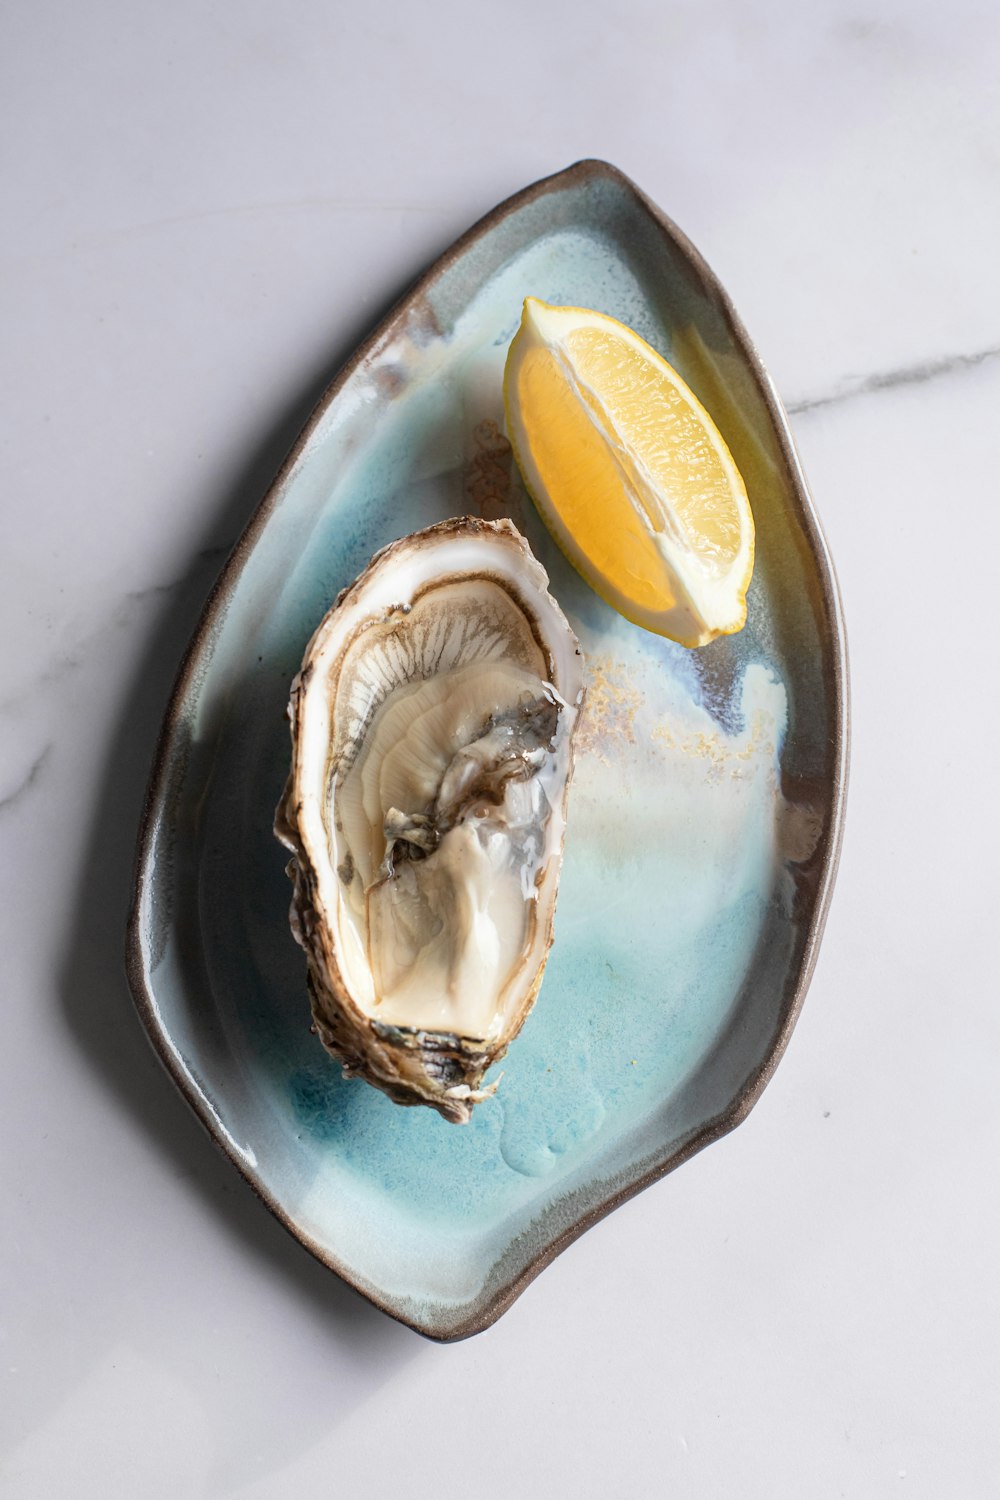 a plate of oysters with a lemon wedge